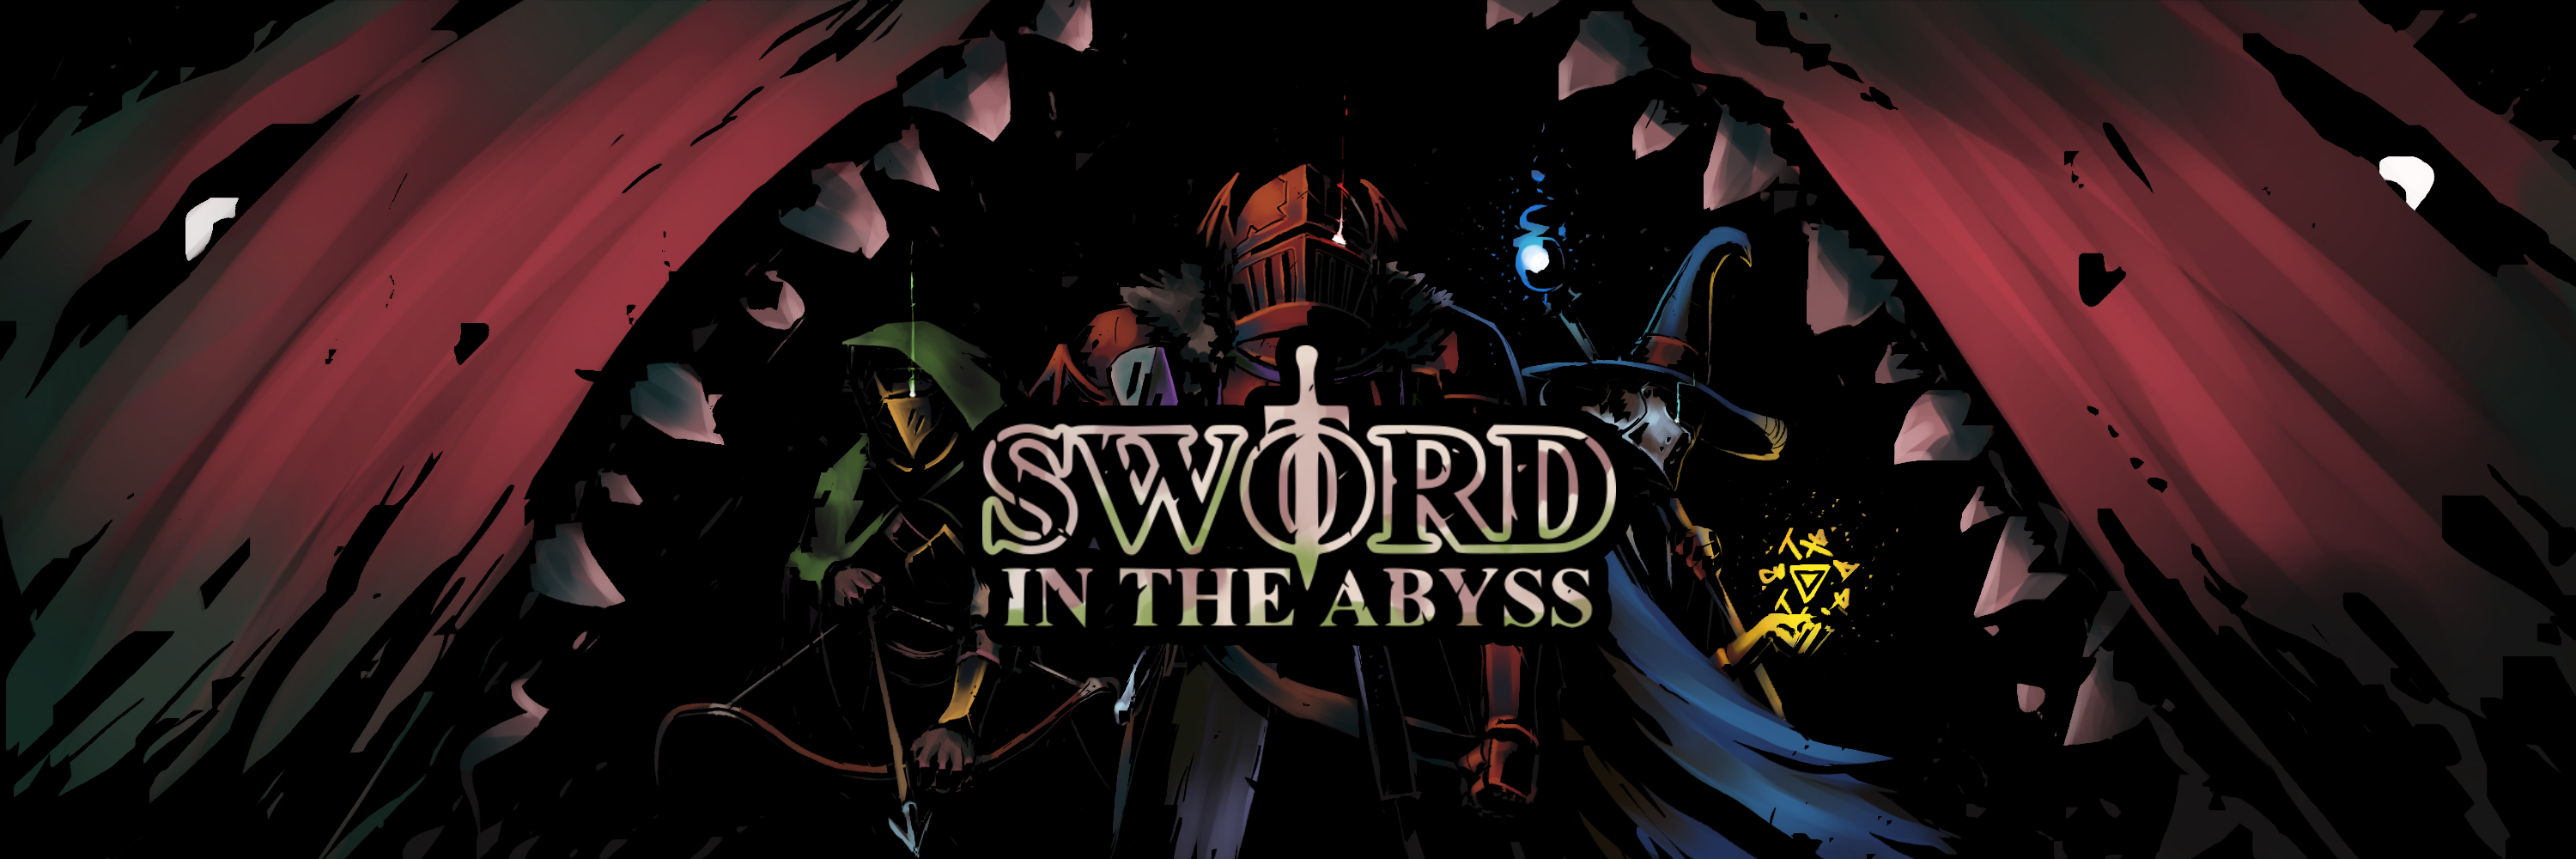 SWORD IN THE ABYSS (DEMO VERSION)